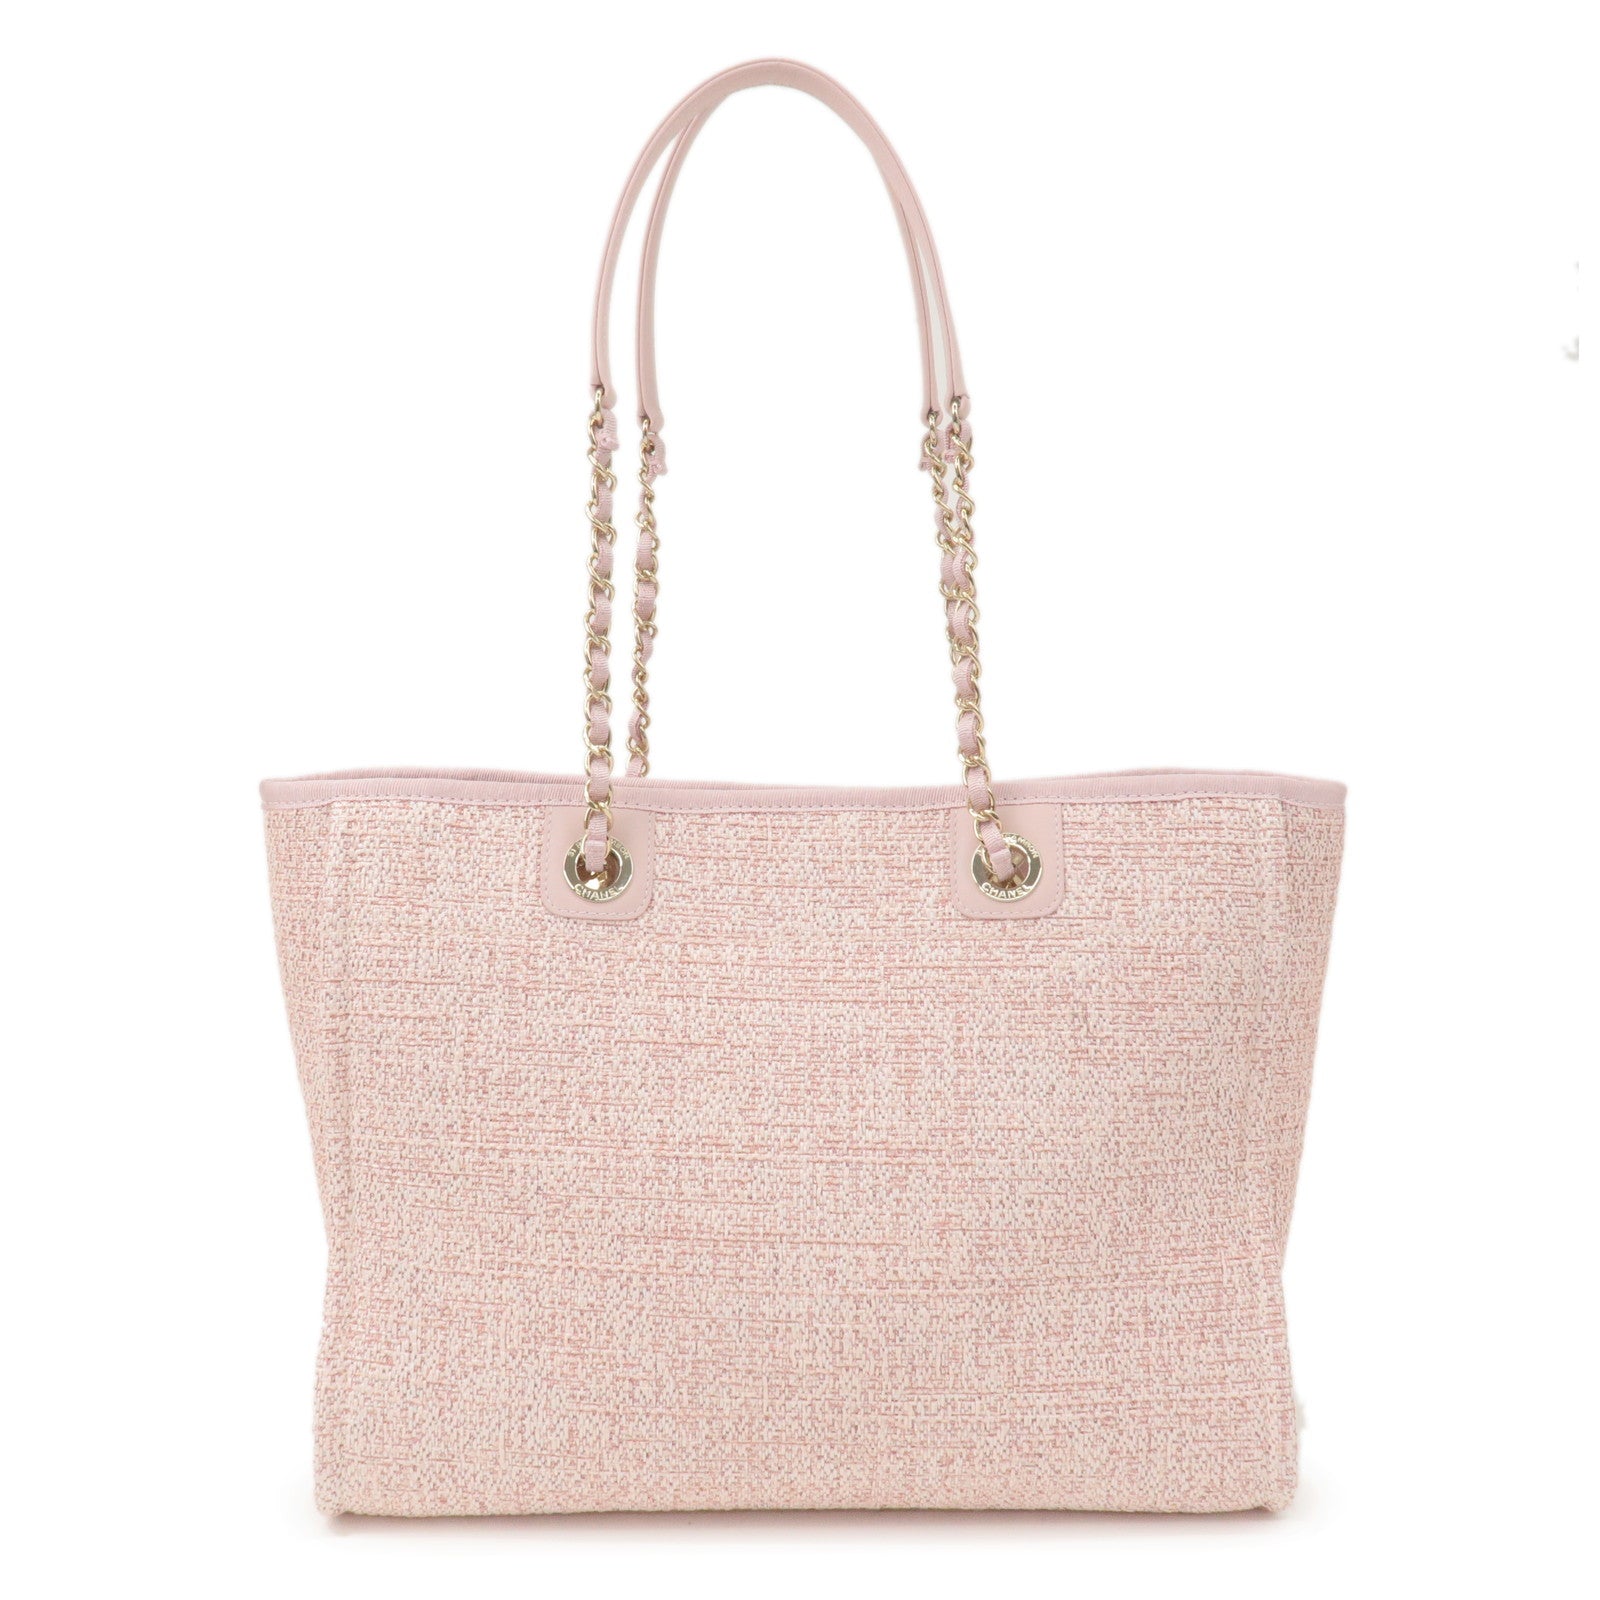 CHANEL-Deauville-MM-Tweed-Leather-Chain-Tote-Bag-Pink-A67001